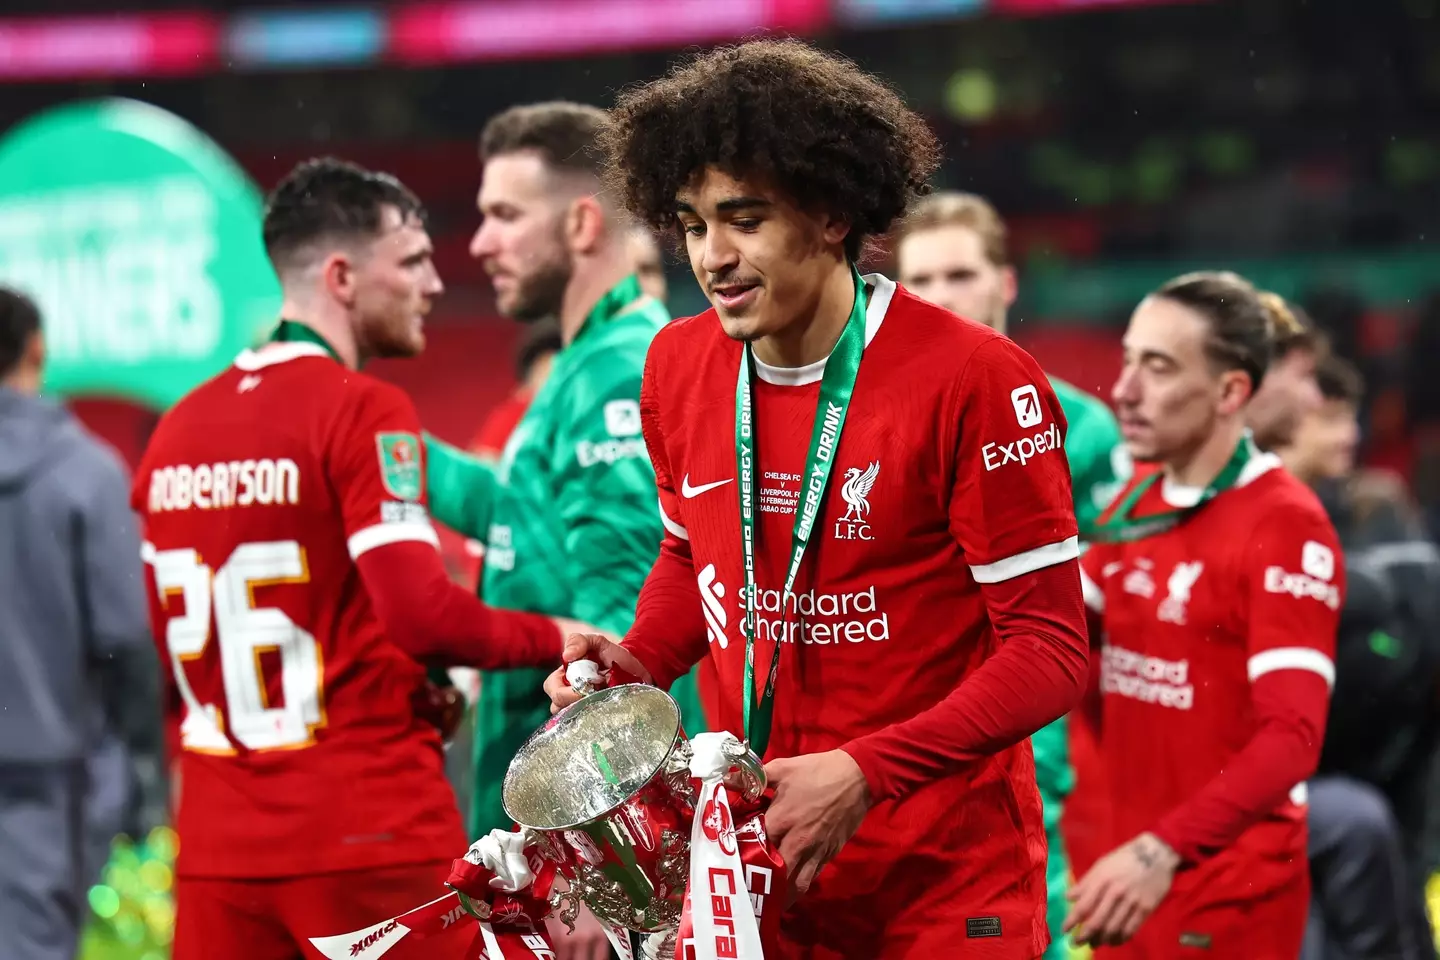 Jayden Danns holding the Carabao Cup trophy after featuring against Chelsea.